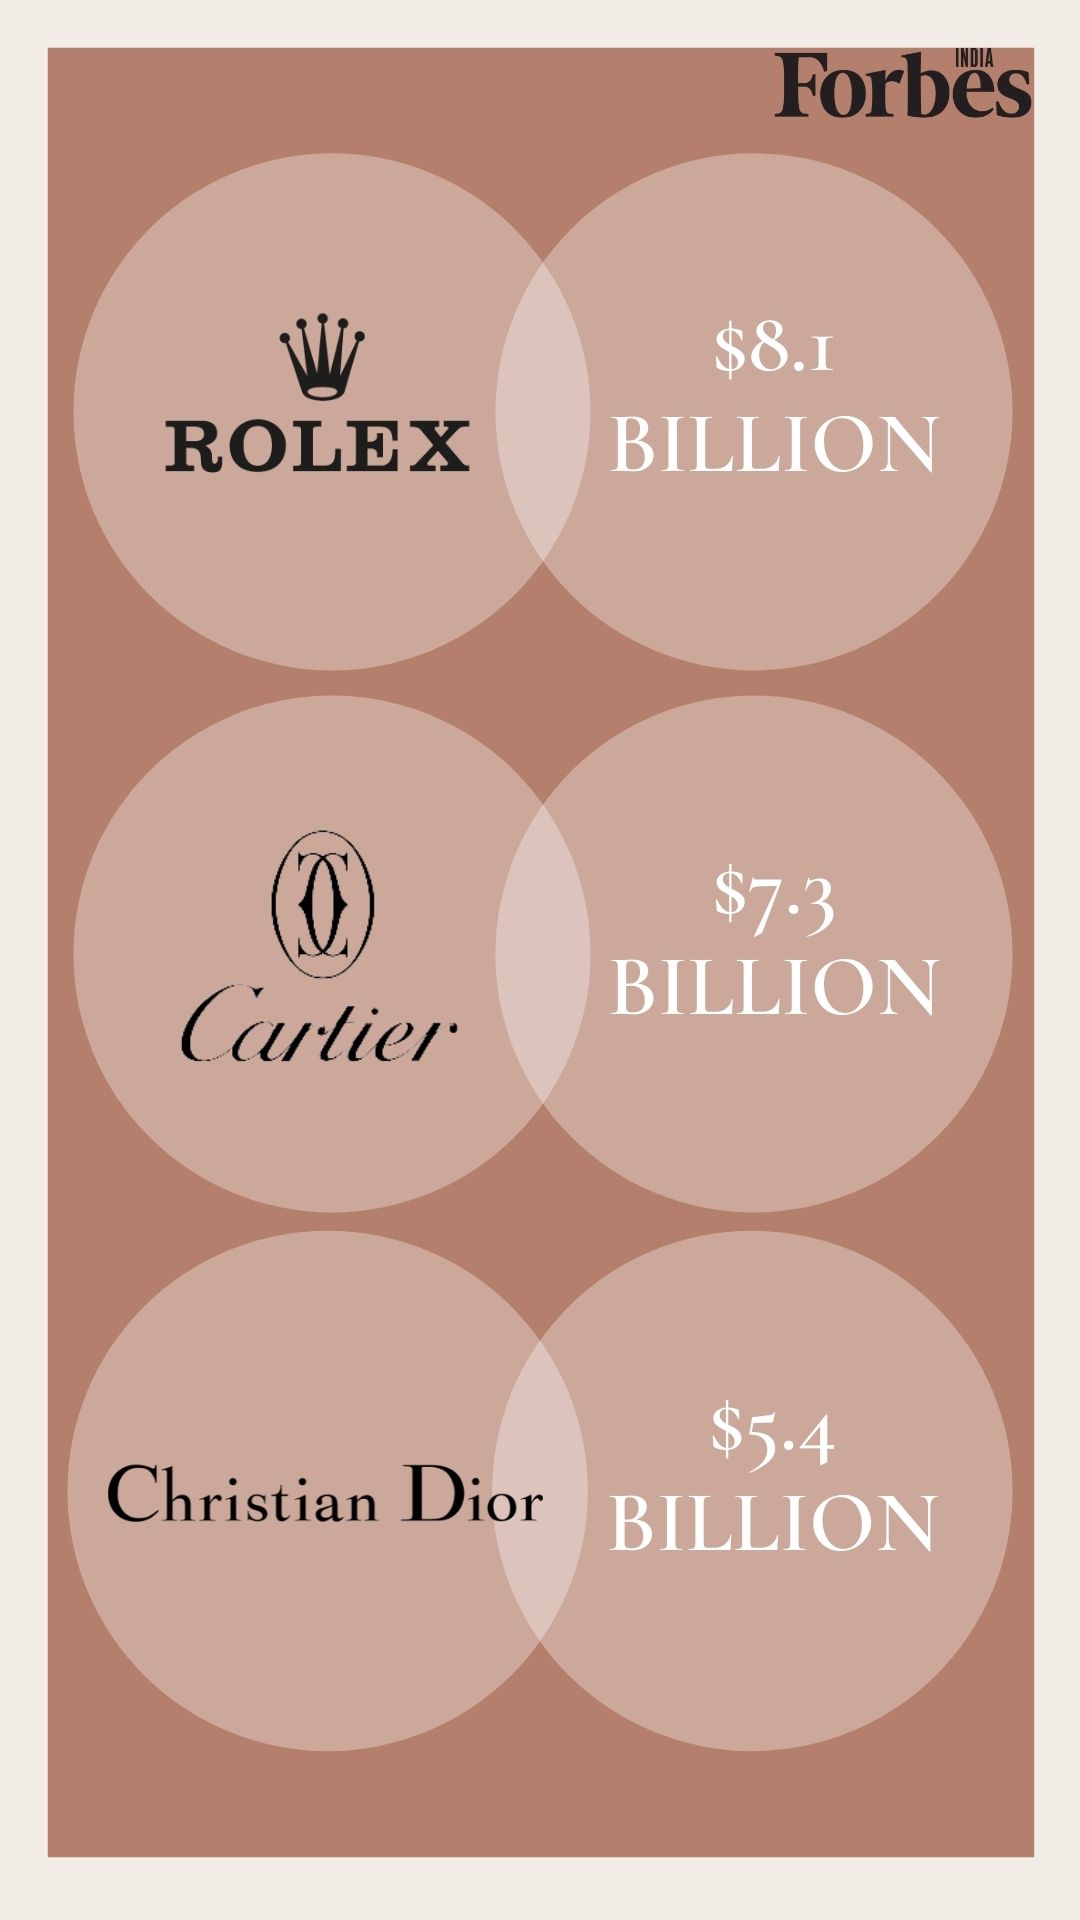 From Louis Vuitton to Cartier, these are the world's most valuable luxury brands of 2021